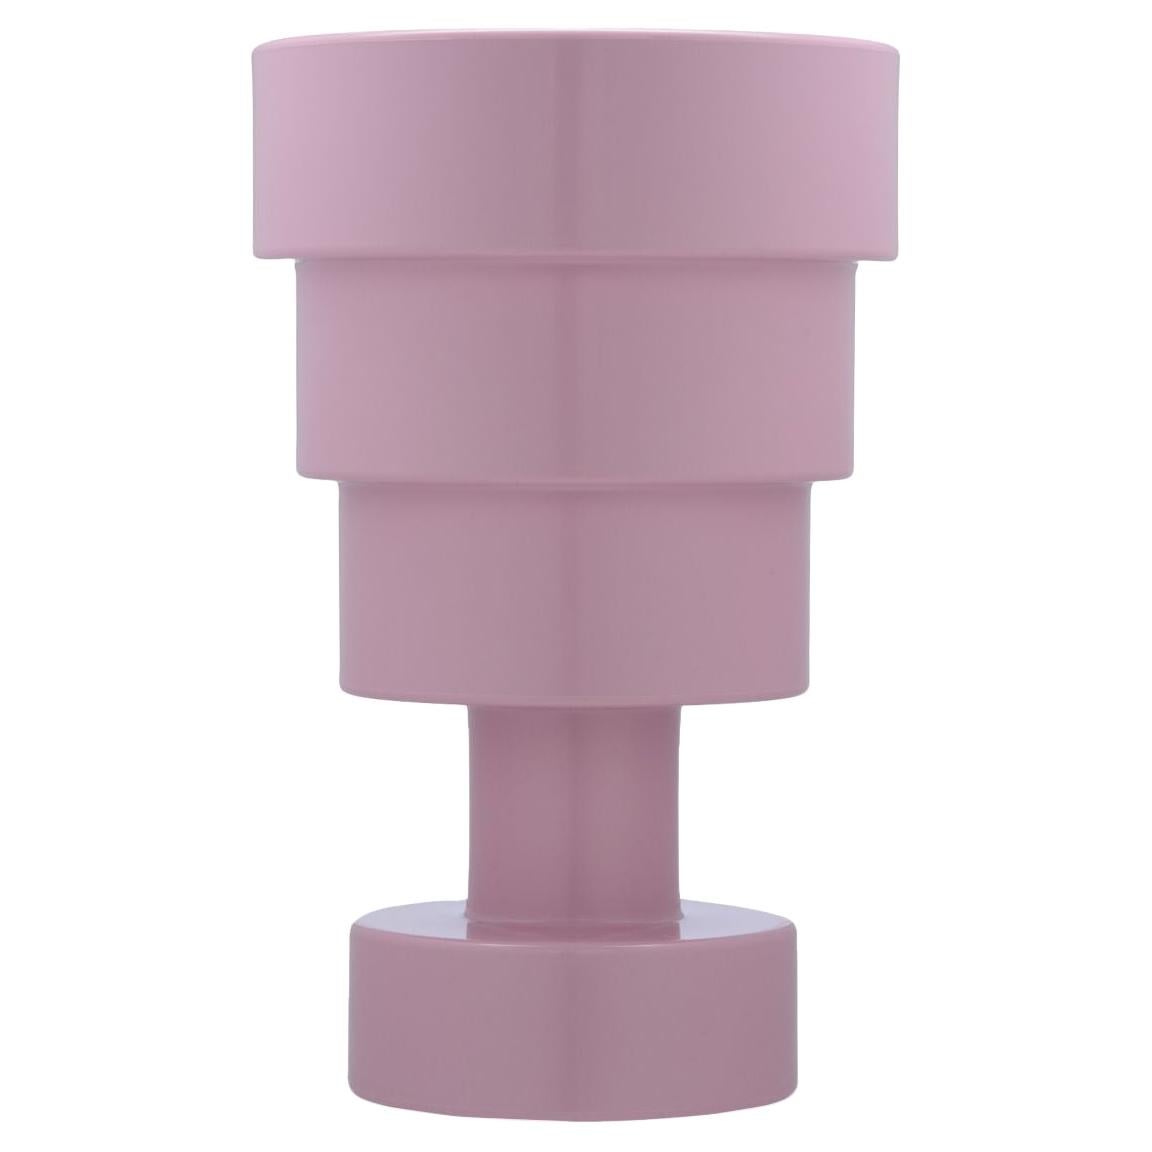 Kartell Calice Stool in Pink by Ettore Sottsass For Sale